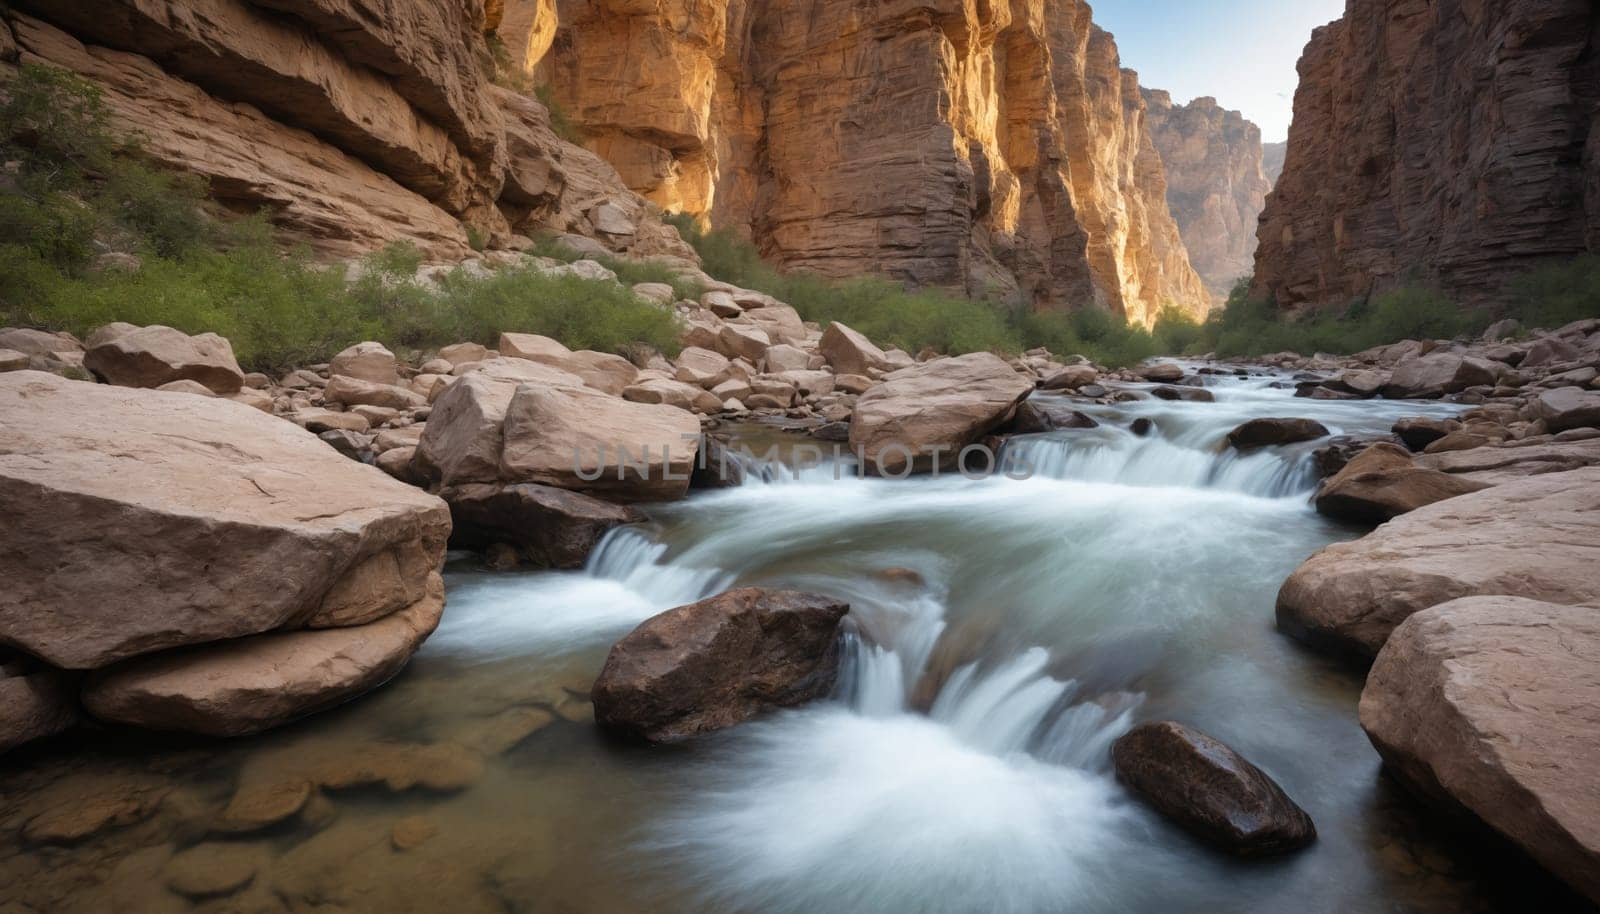 The rushing water of a stream carves its way through a narrow canyon, its movement blurred by the long exposure shot. The walls of the canyon rise high above the water, casting long shadows over the rocky riverbed.